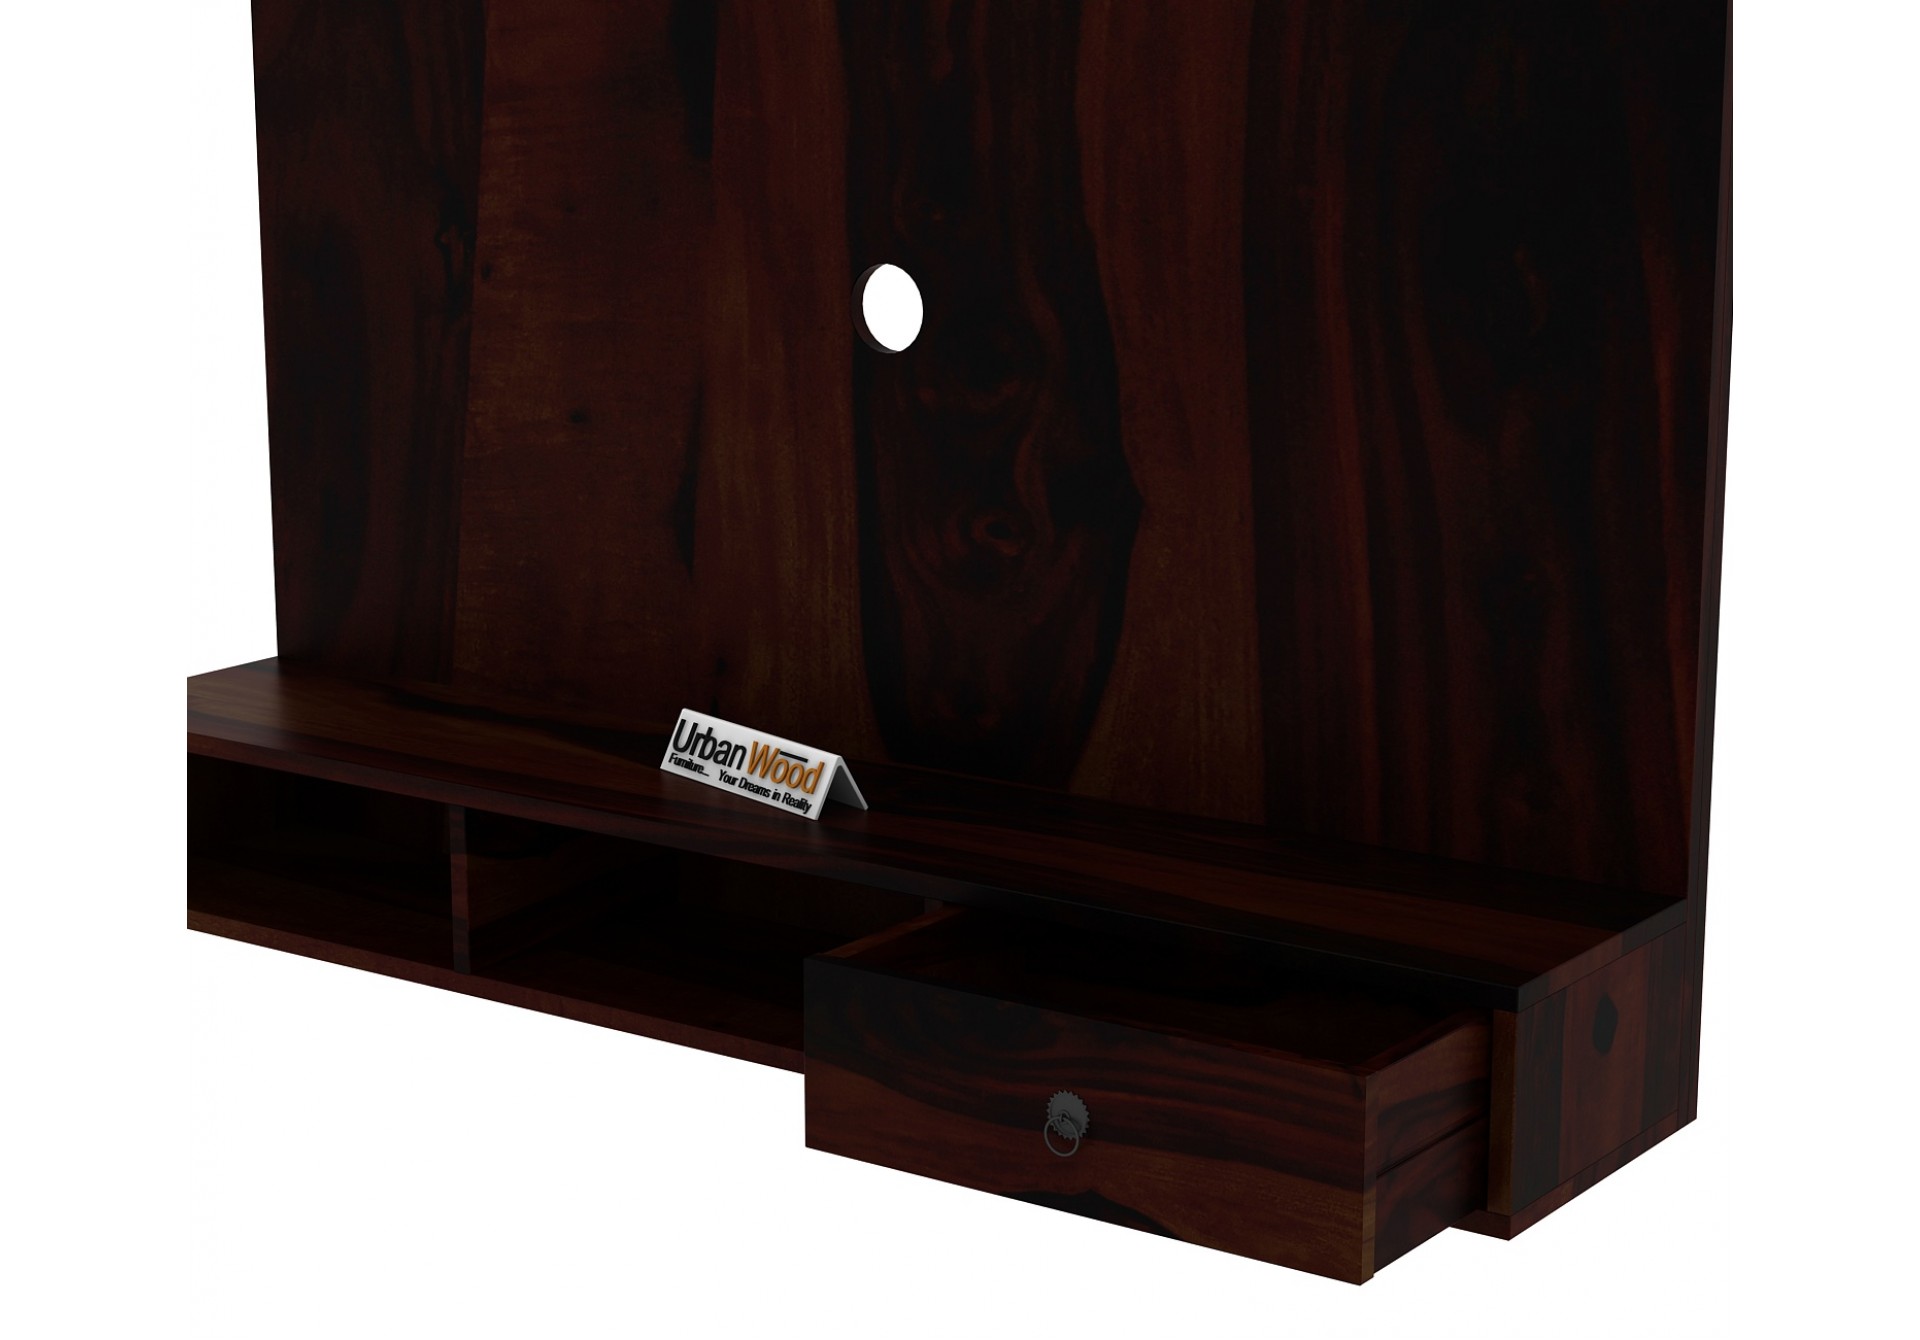 Ource Wooden Wall Mount TV Unit (Walnut Finish)